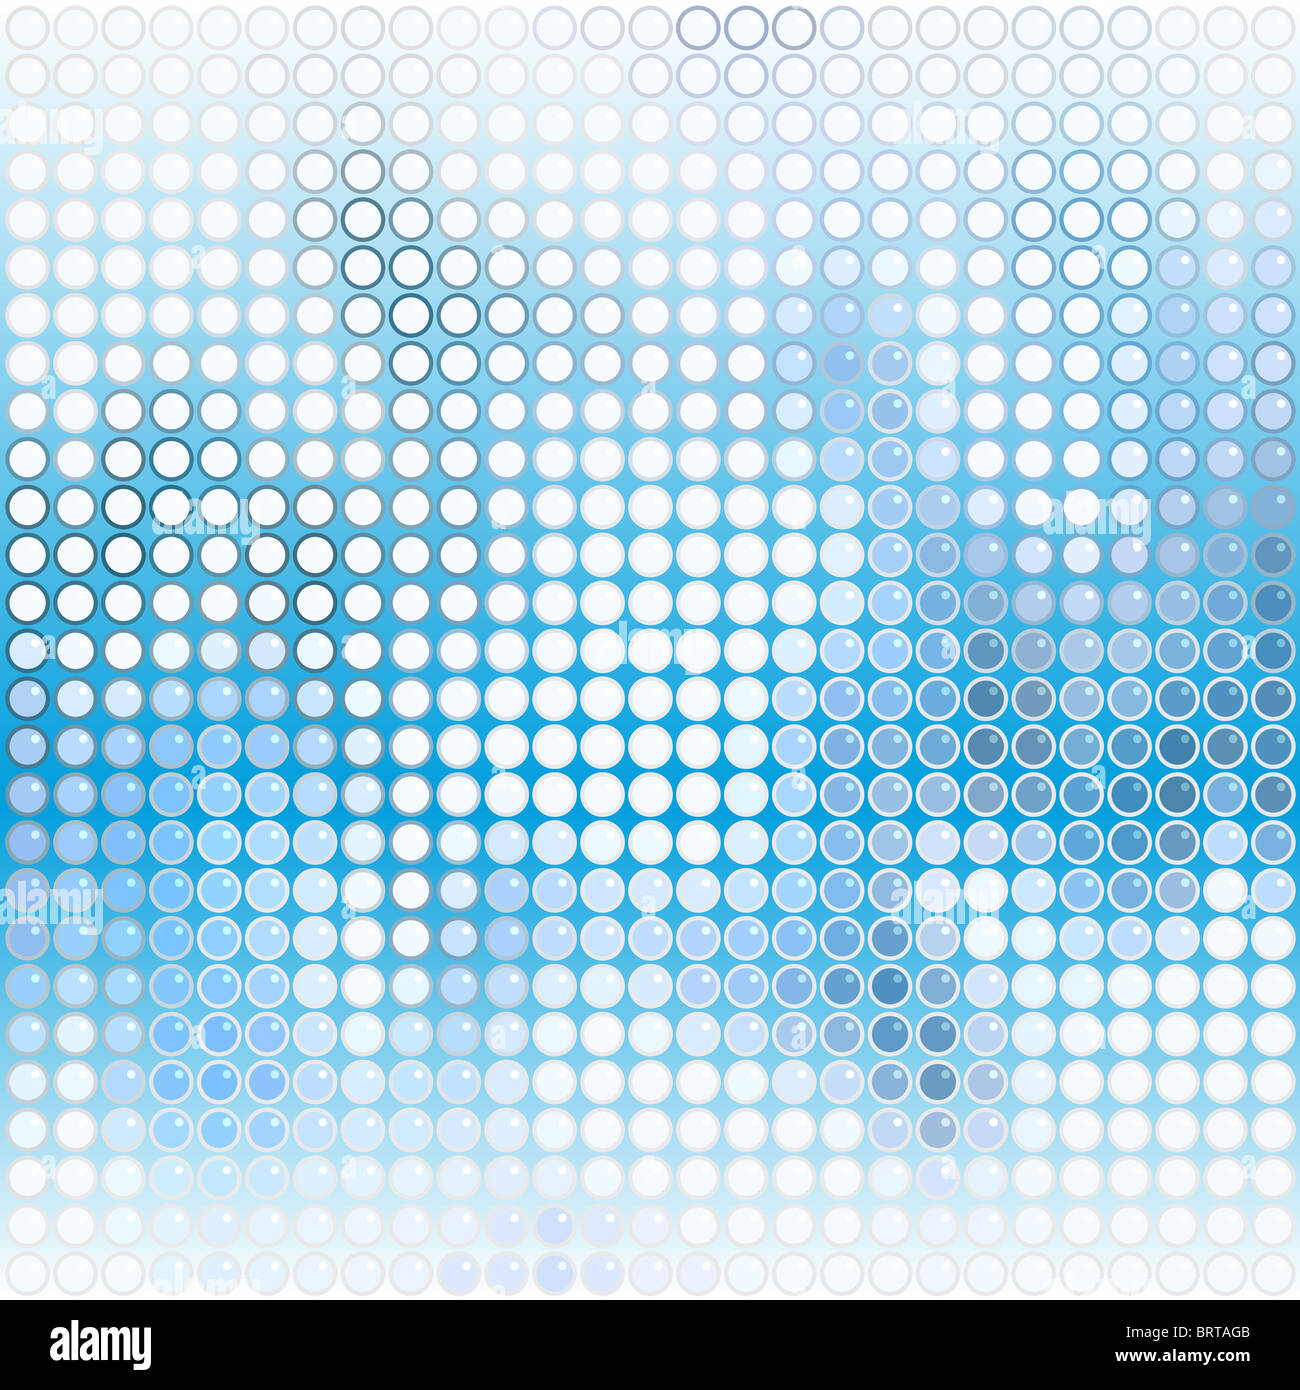 Abstract illustrated background of blue and white circles Stock Photo